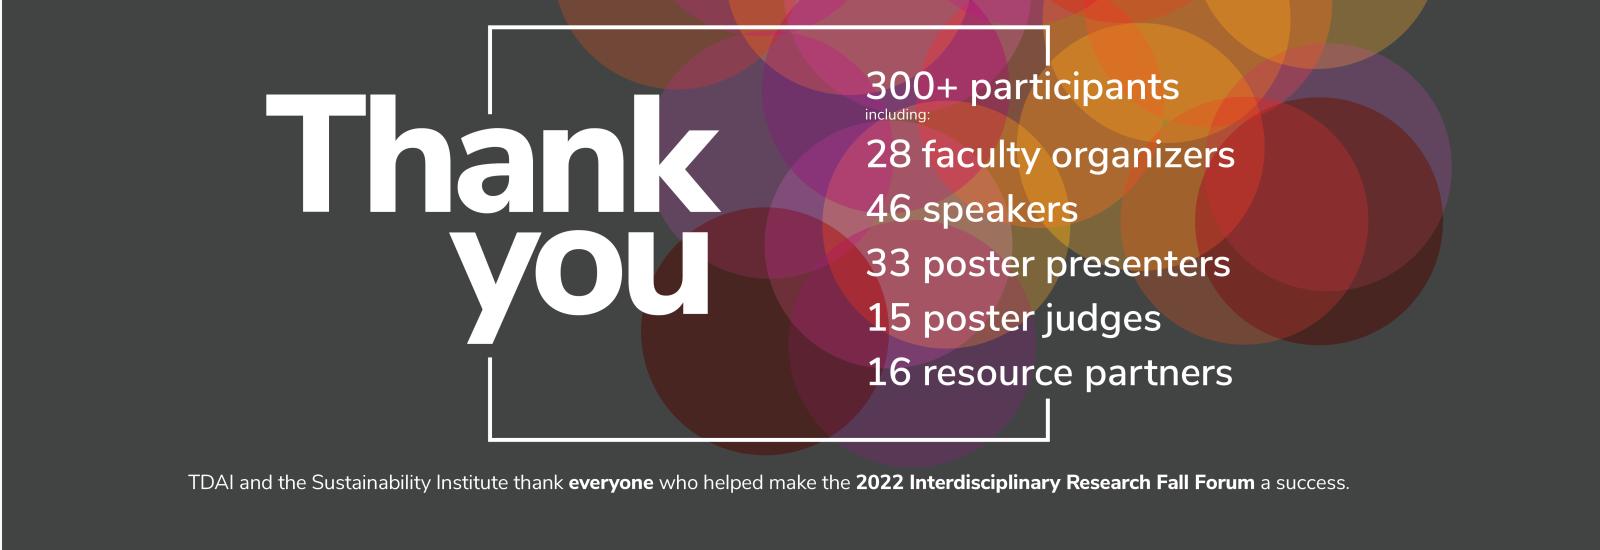 Thank you graphic for 2022 fall forum that lists participants